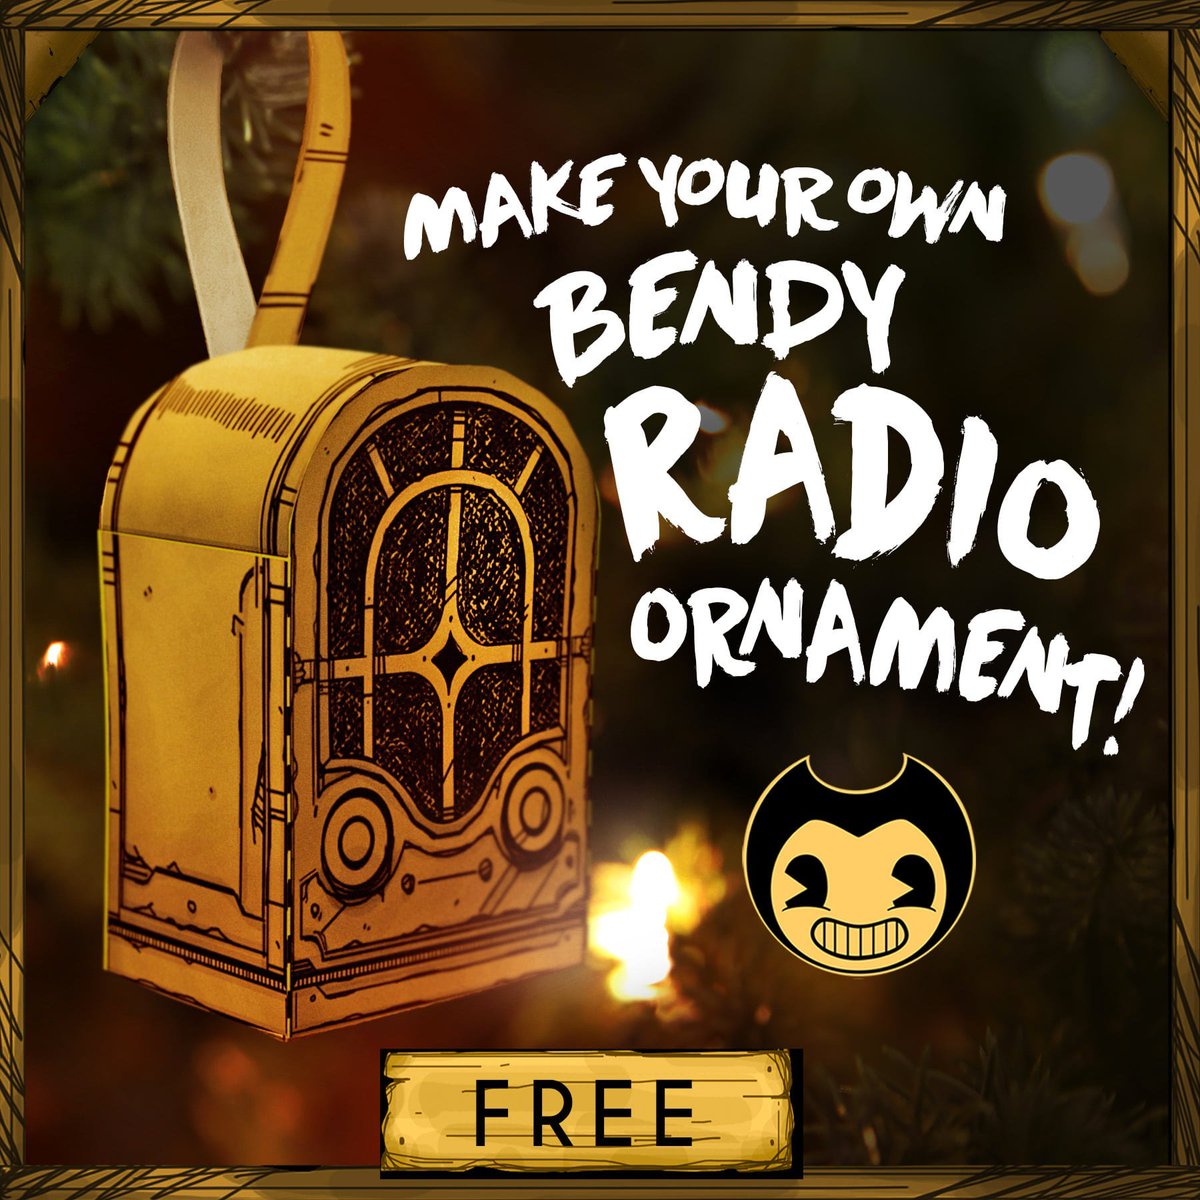 'Make your own Bendy Radio Ornament!' - Joey Drew Studios (2021) #BENDY #Bendy_and_the_Ink_Machine